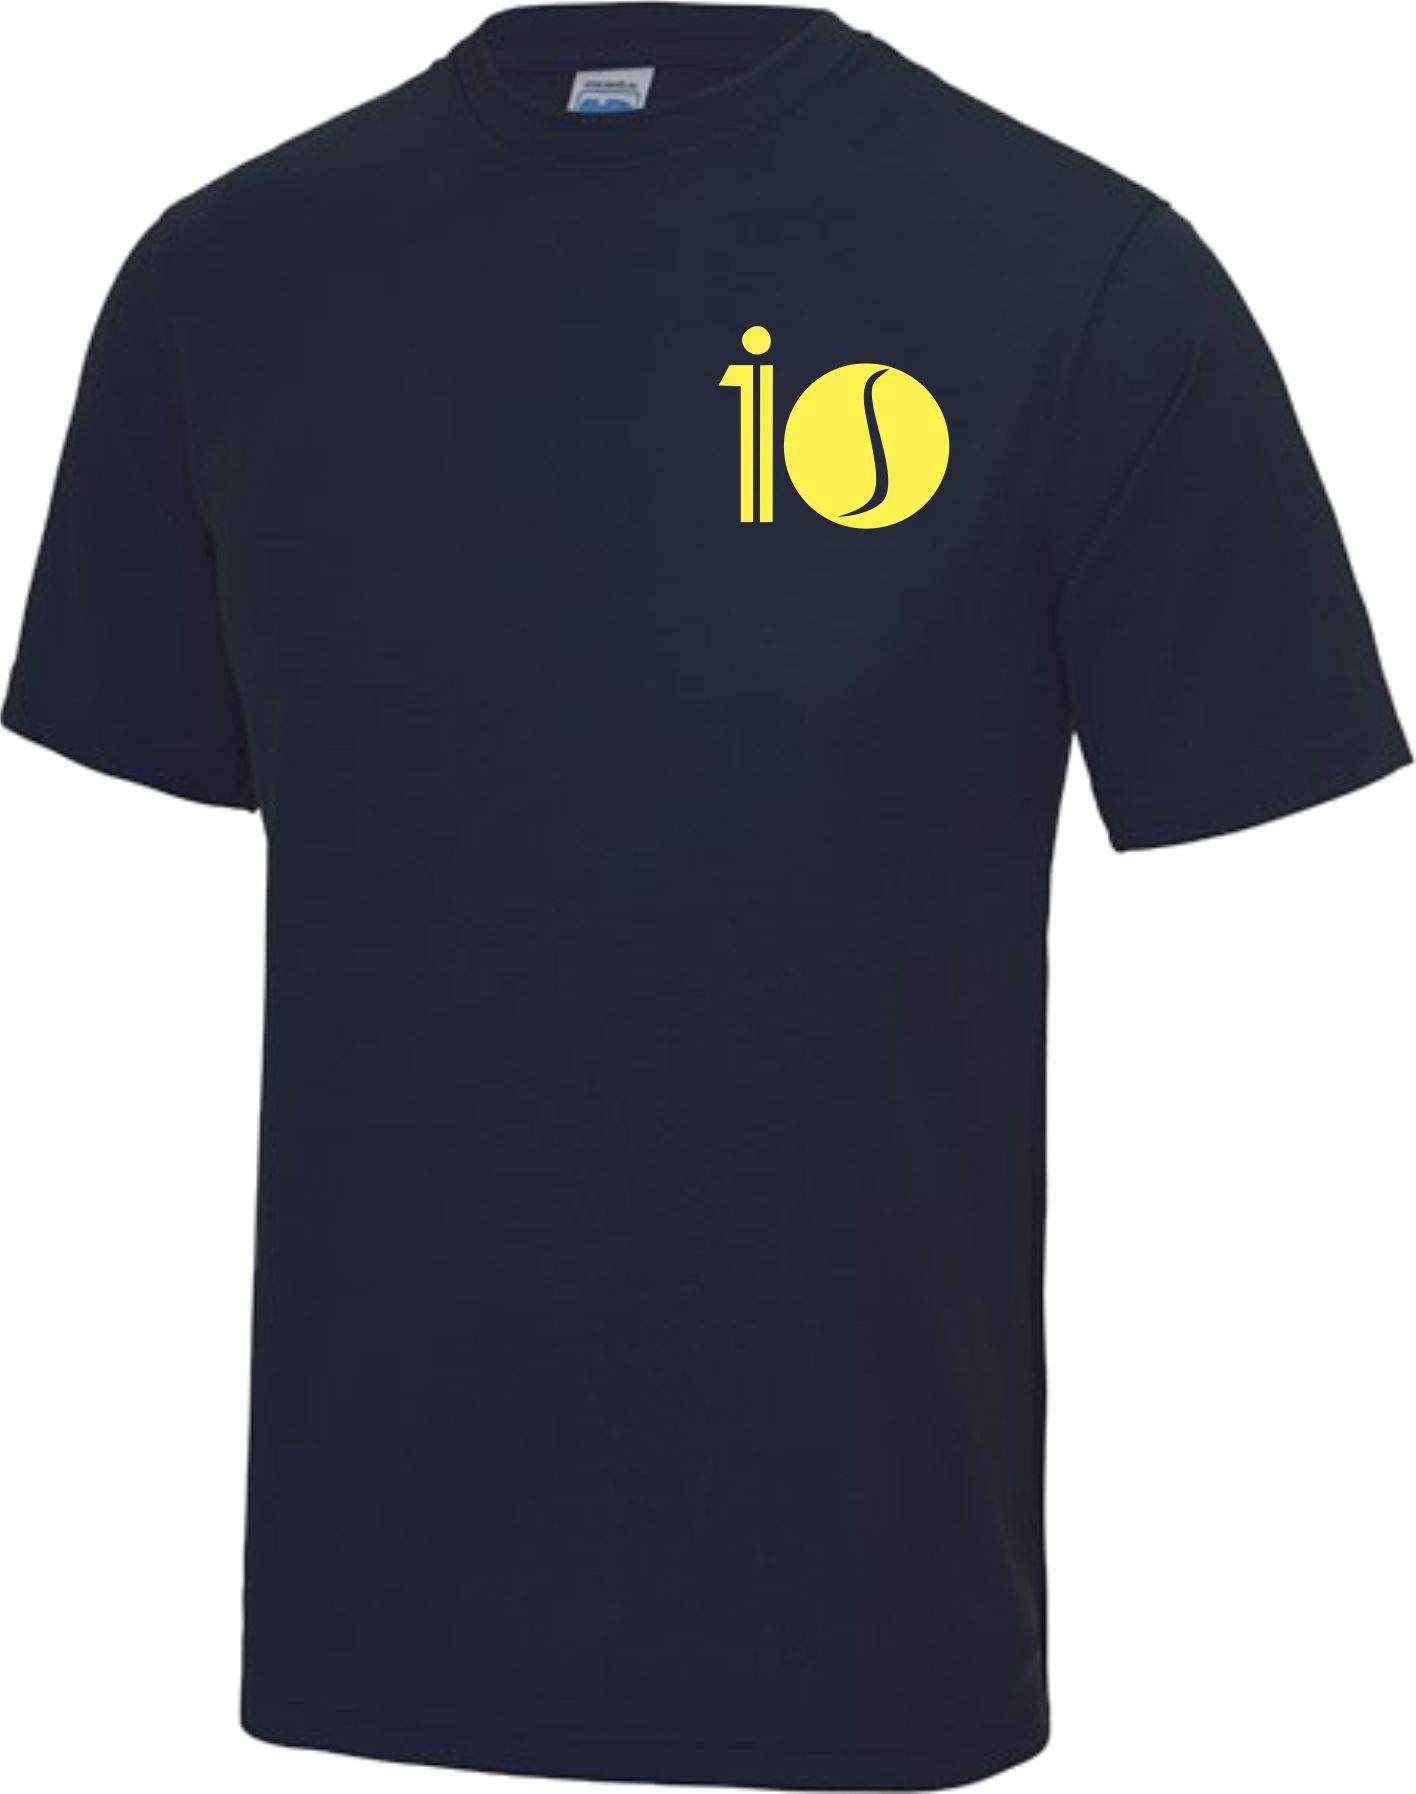 10is Academy Short Sleeve Cool T (Unisex)